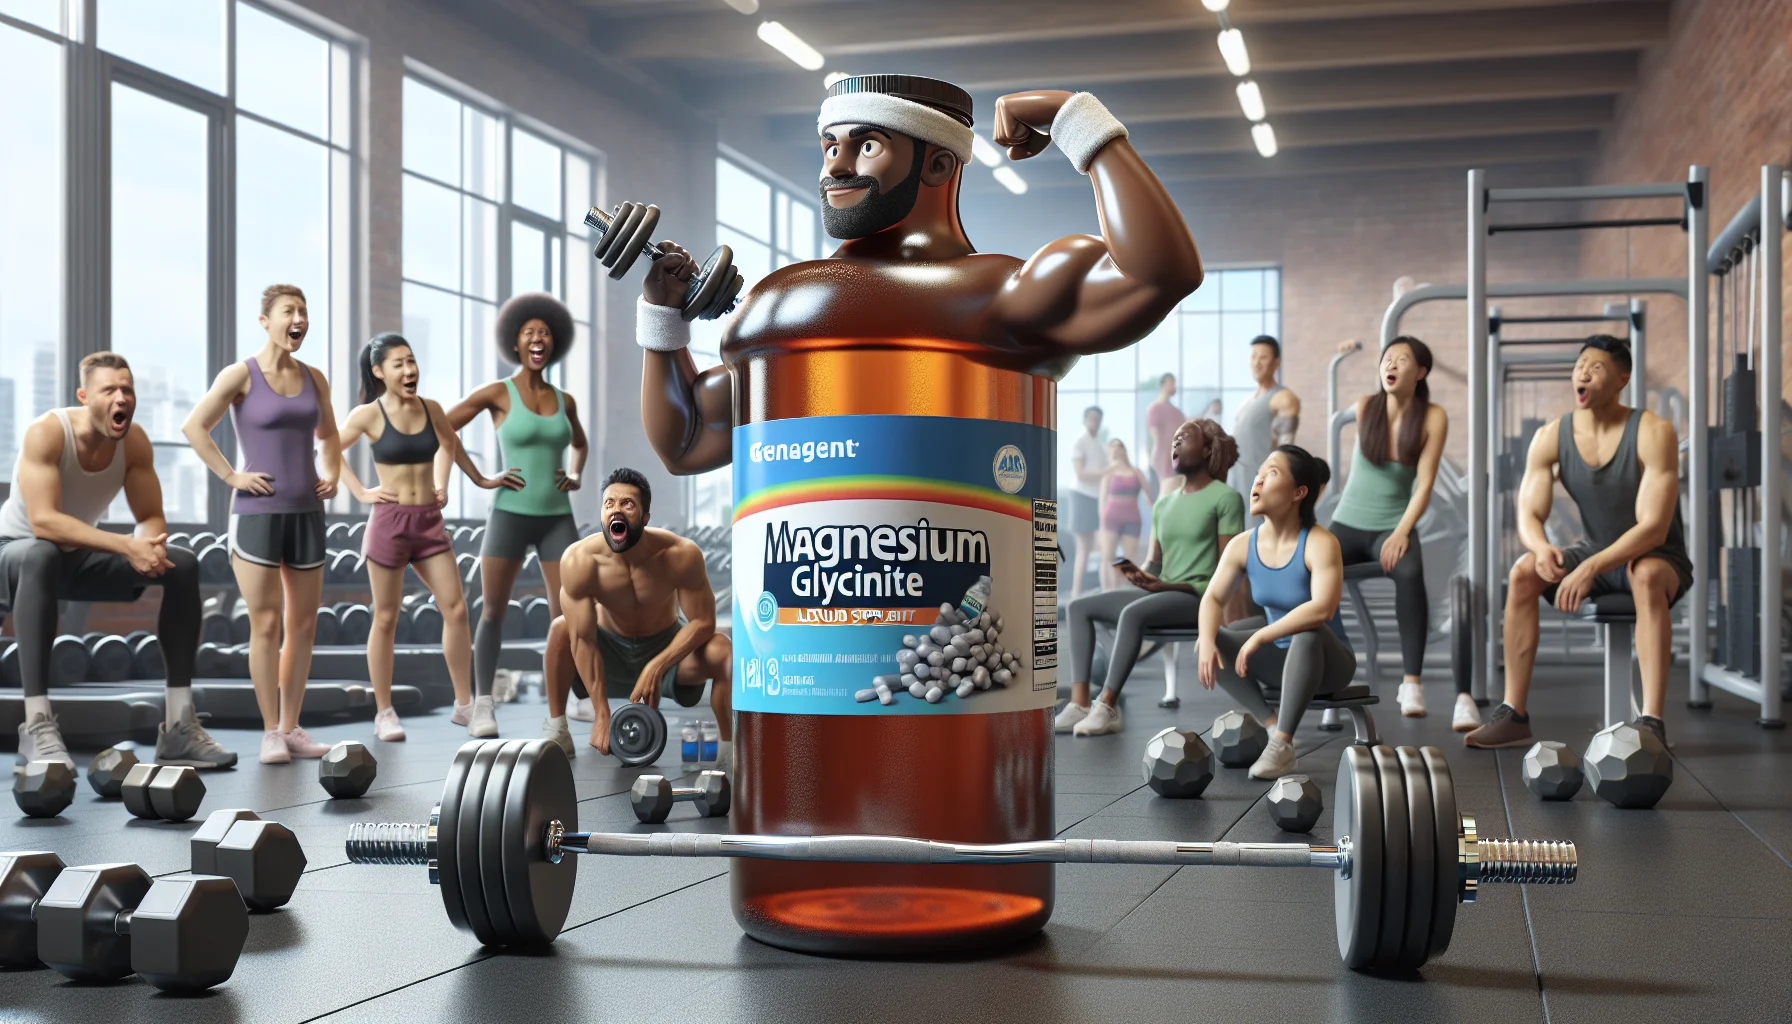 Generate a creative and realistic scenario featuring a bottle of magnesium glycinate liquid supplement. The bottle is set in a gym environment filled with workout equipment such as dumbbells, treadmills, and barbells. In this humorous scenario, the bottle is depicted as a successful athlete, wearing a sweatband, lifting a tiny barbell with a confident expression, symbolizing the strength it provides to its consumers. Nearby, there are people of diverse descents and genders, ranging from White, Hispanic, Black, Middle-Eastern, to South Asian, expressing astonishment and admiration at the 'athlete' bottle's amazing strength and resilience.